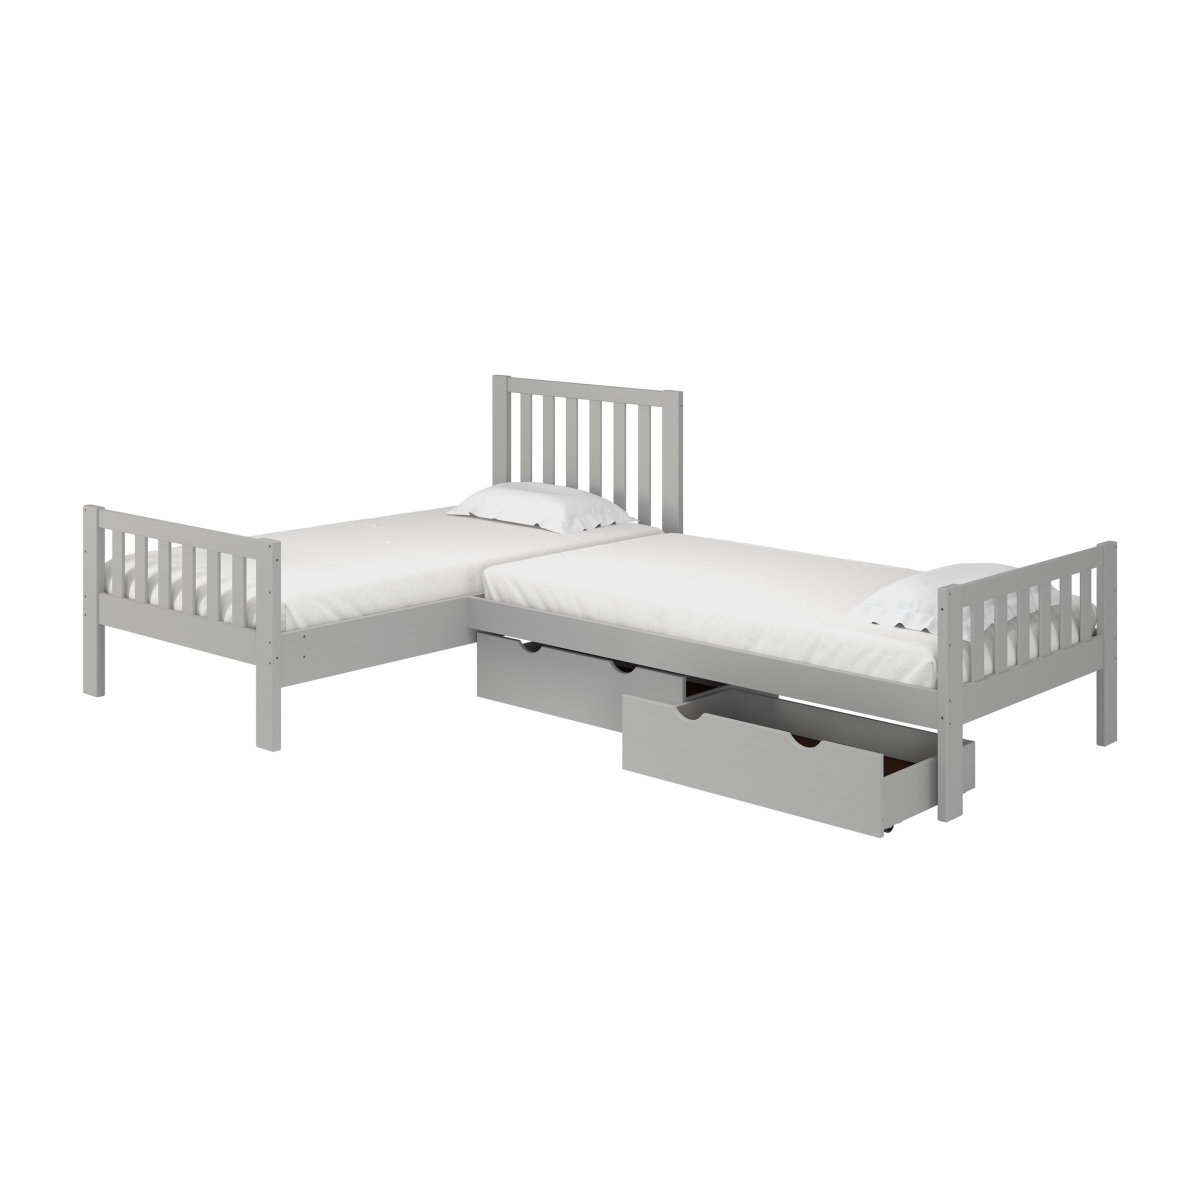 Picture of Alaterre AJAU1180S Aurora Corner L-Shaped Twin Wood Bed Set with Storage Drawers, Dove Gray